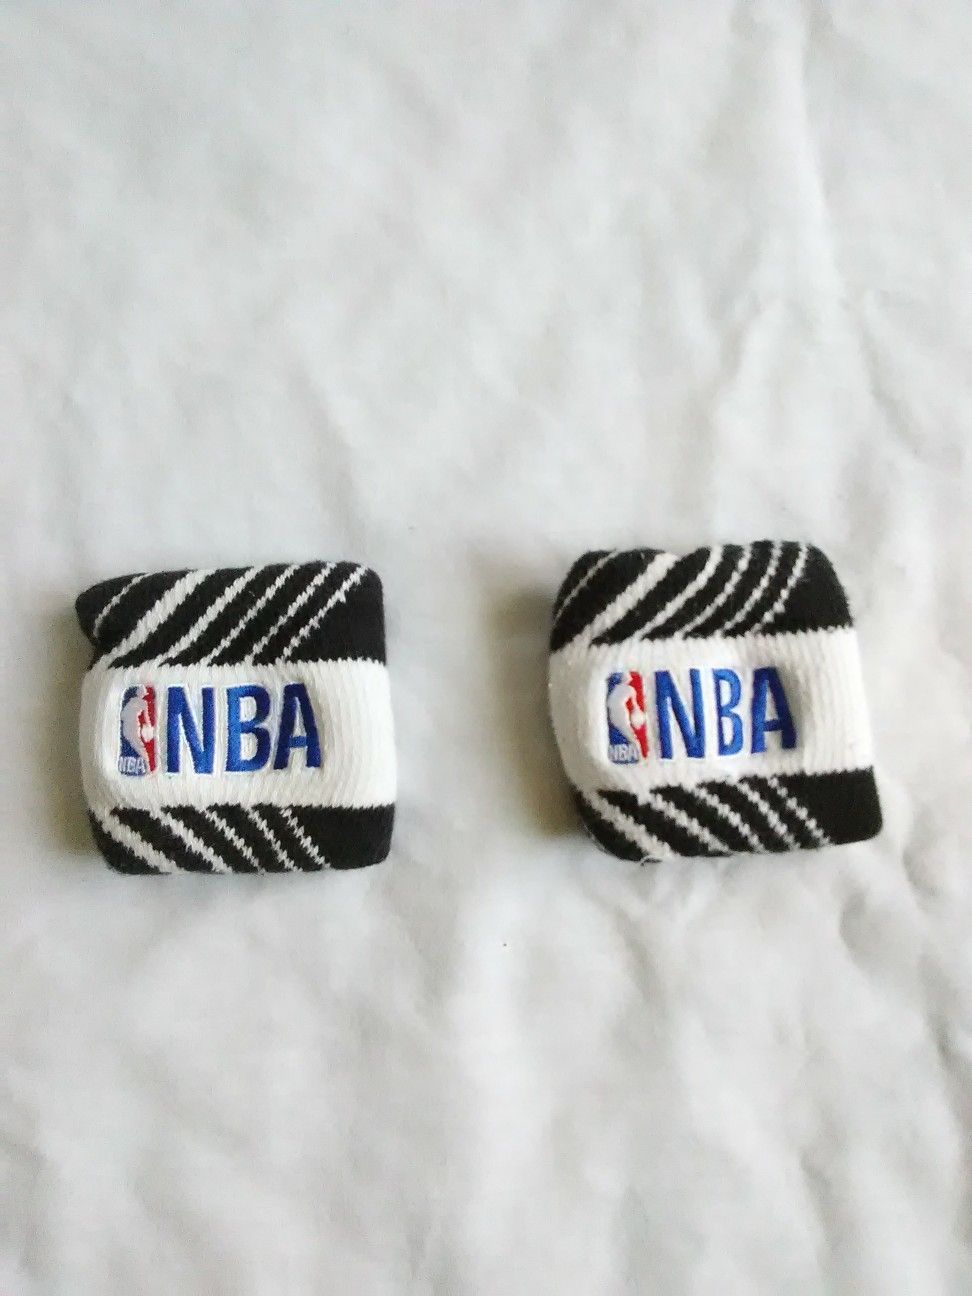 1 Pair NBA Embroidered Logo Sweatbands Wristbands Fitness Exercise Performance Comfort Black & White